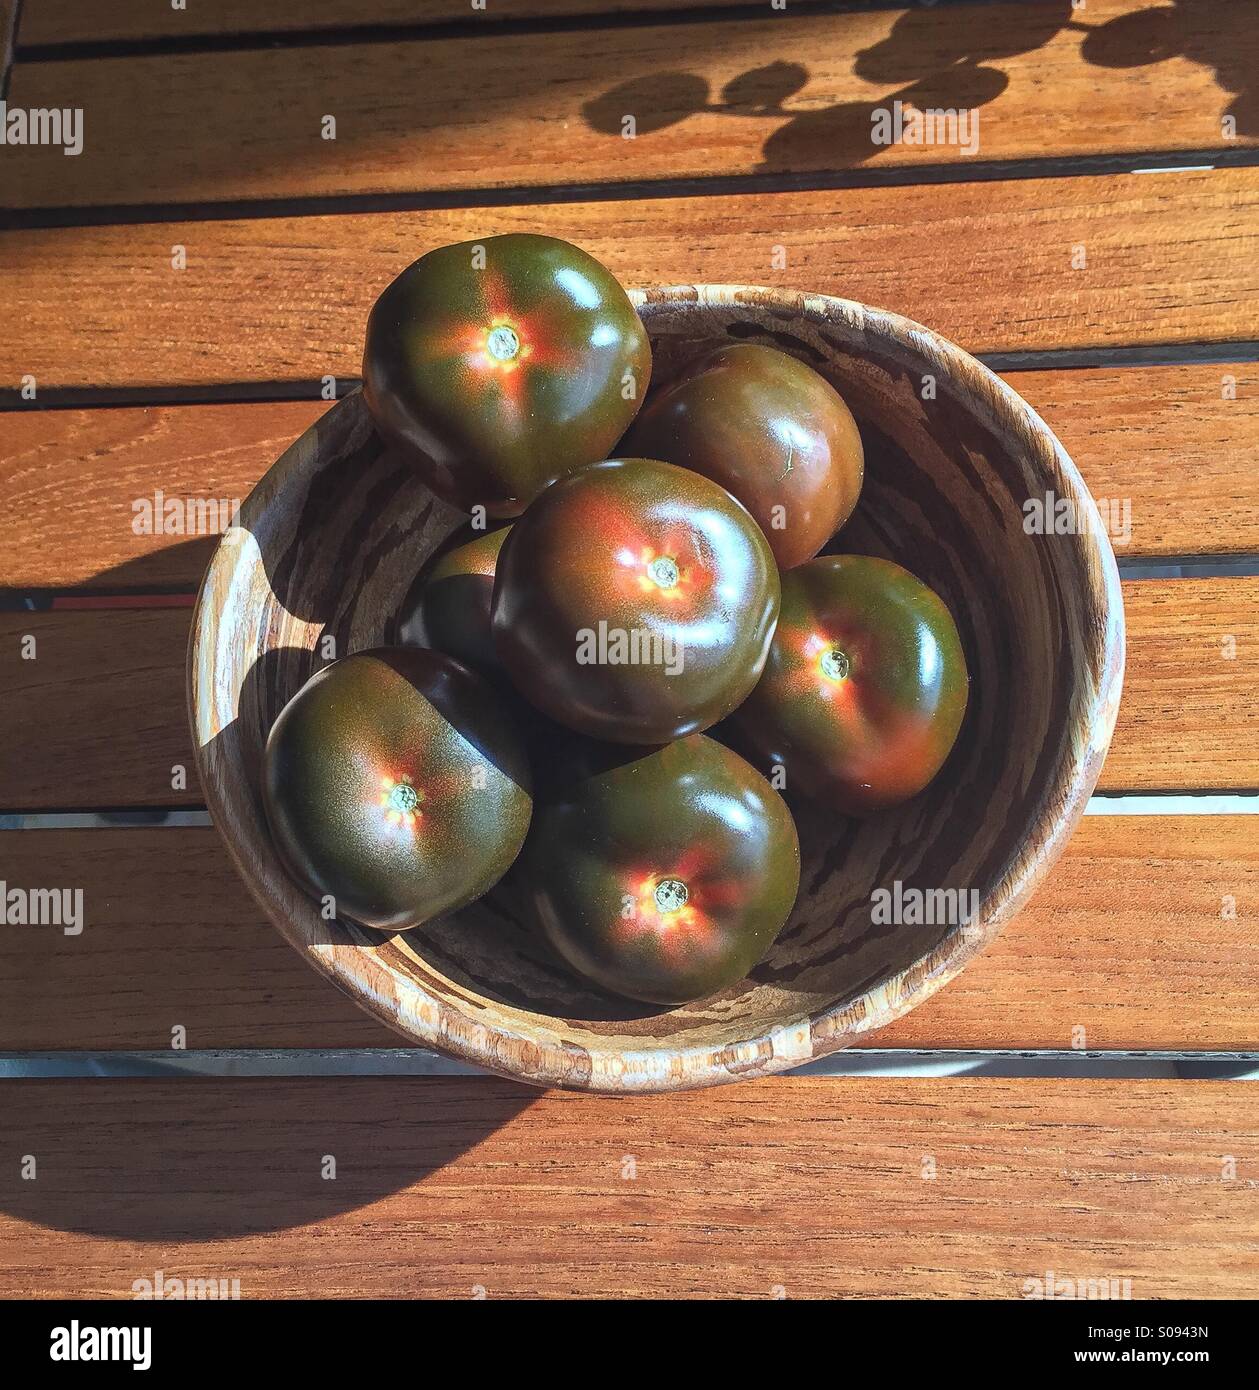 Heirloom Tomatoes in a bowl in sunlight Stock Photo